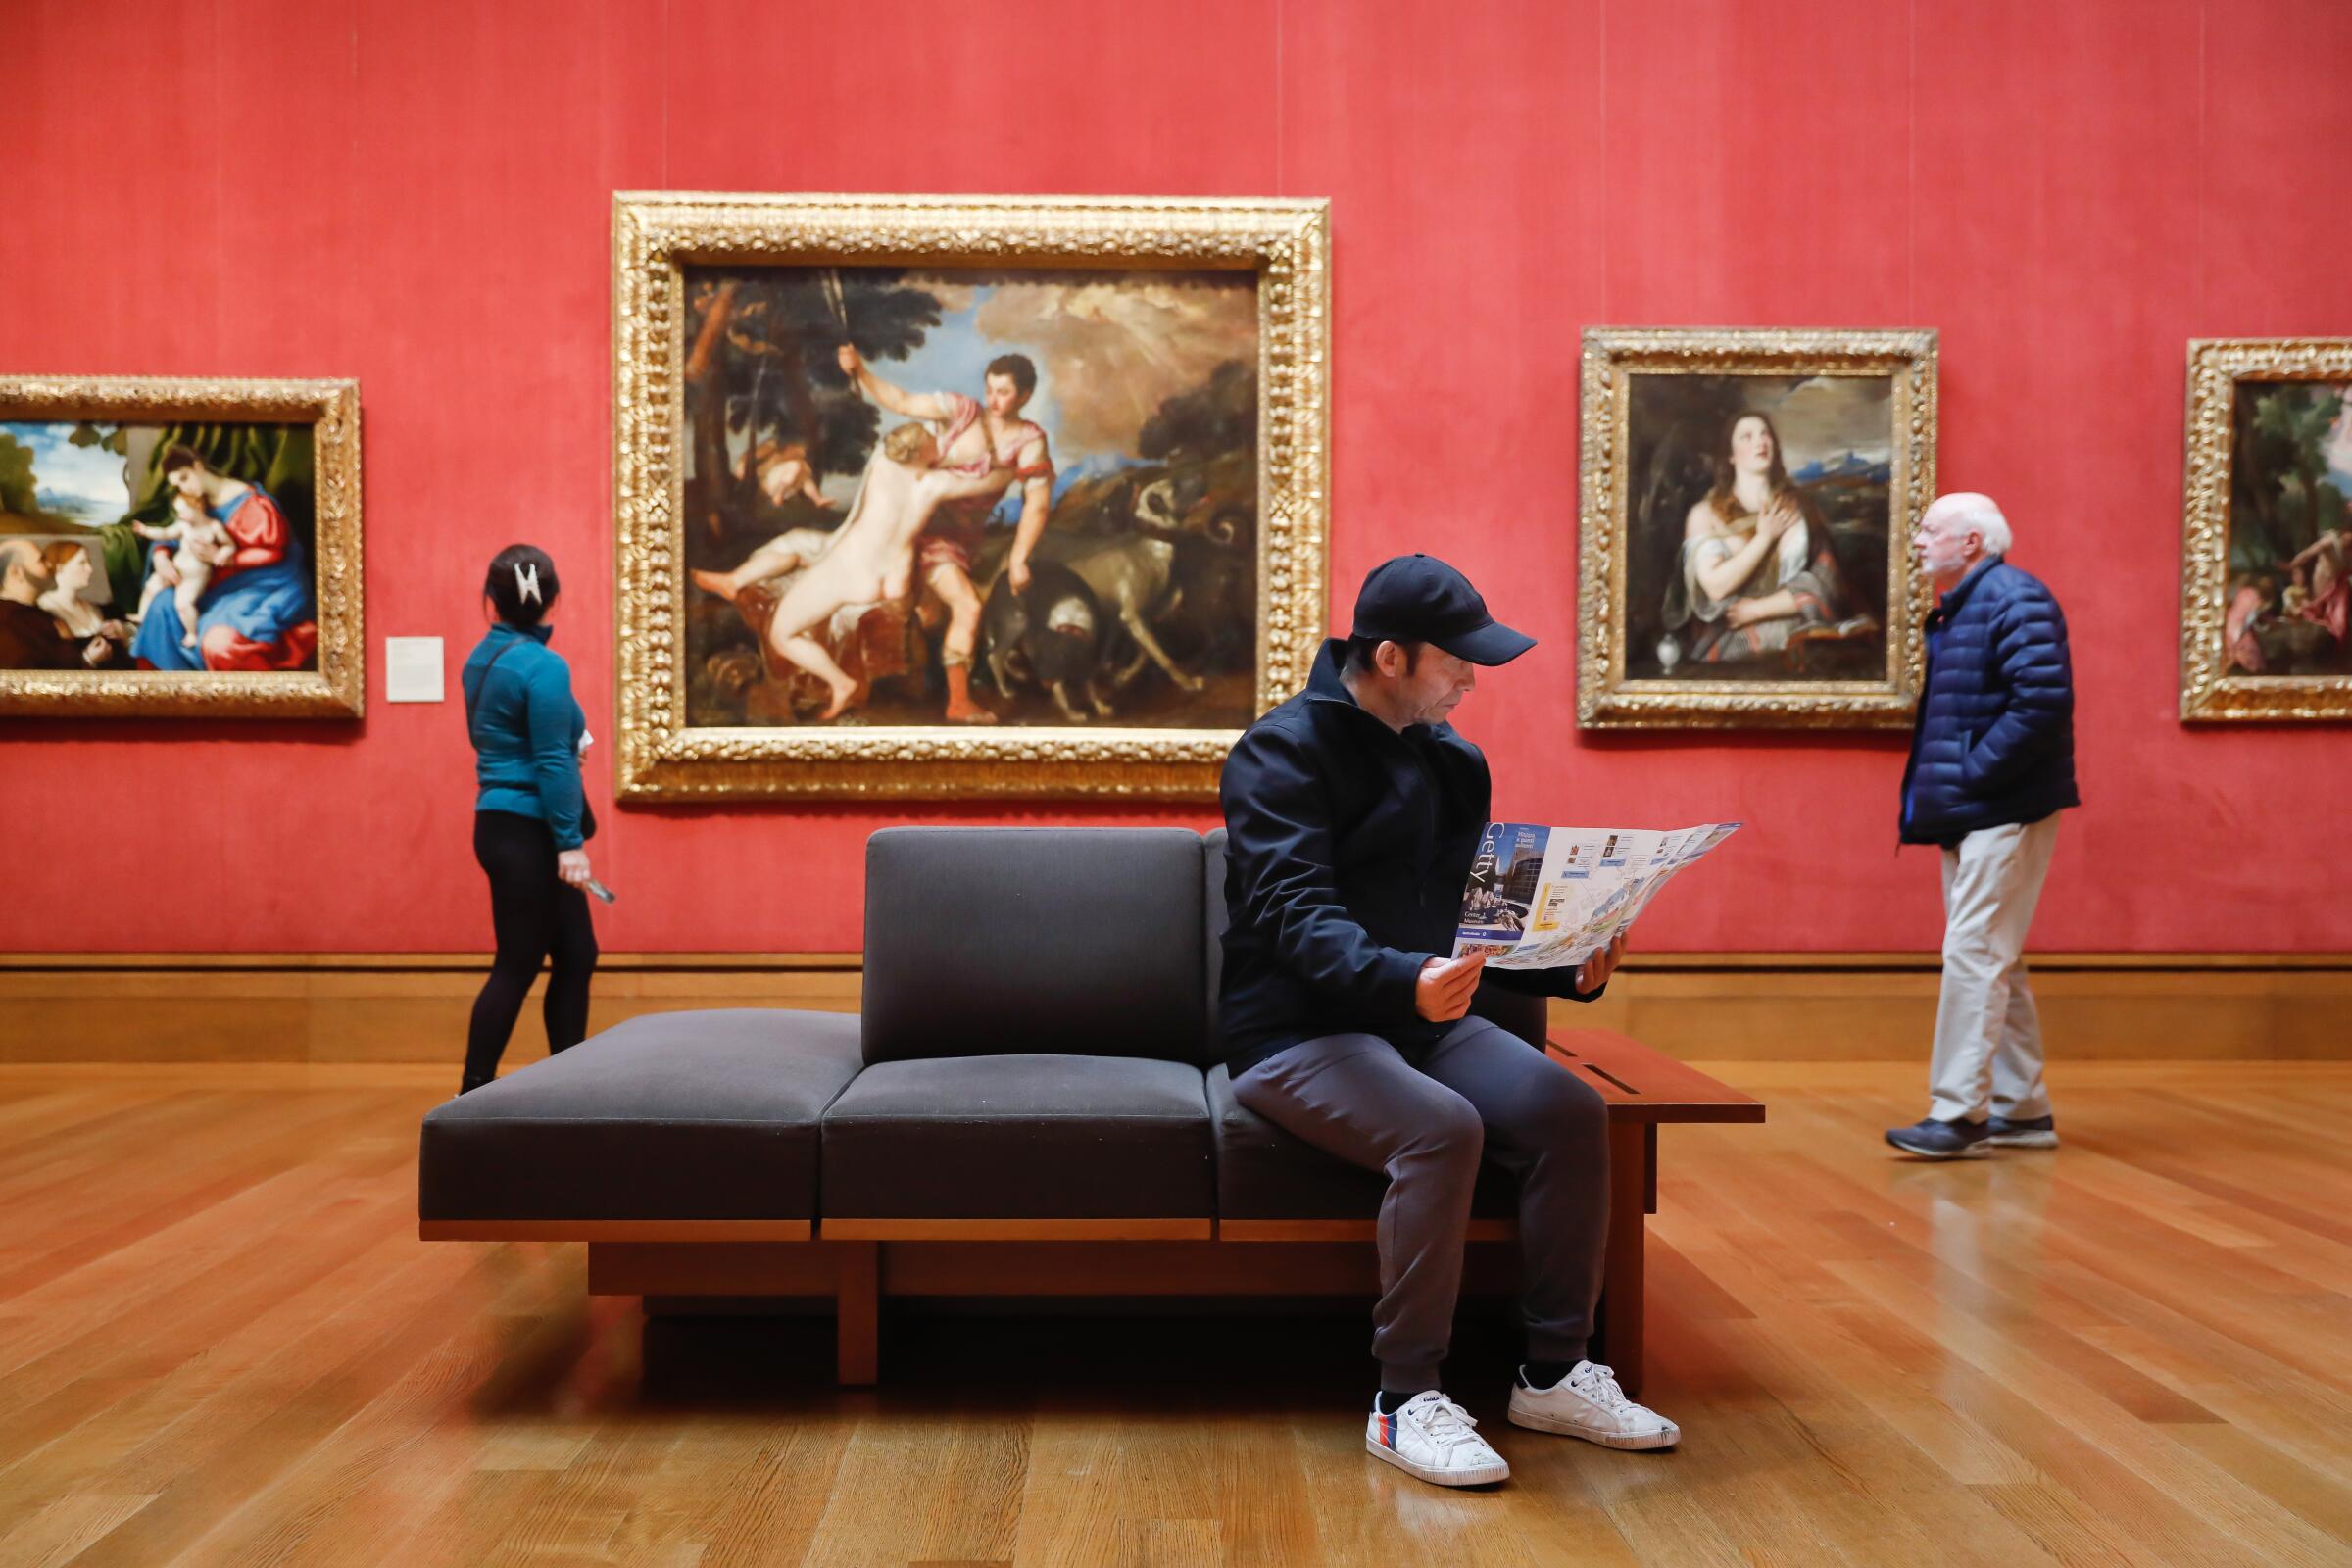 A young man reads a program while sitting on a museum bench in a gallery with red walls hung with Renaissance paintings.